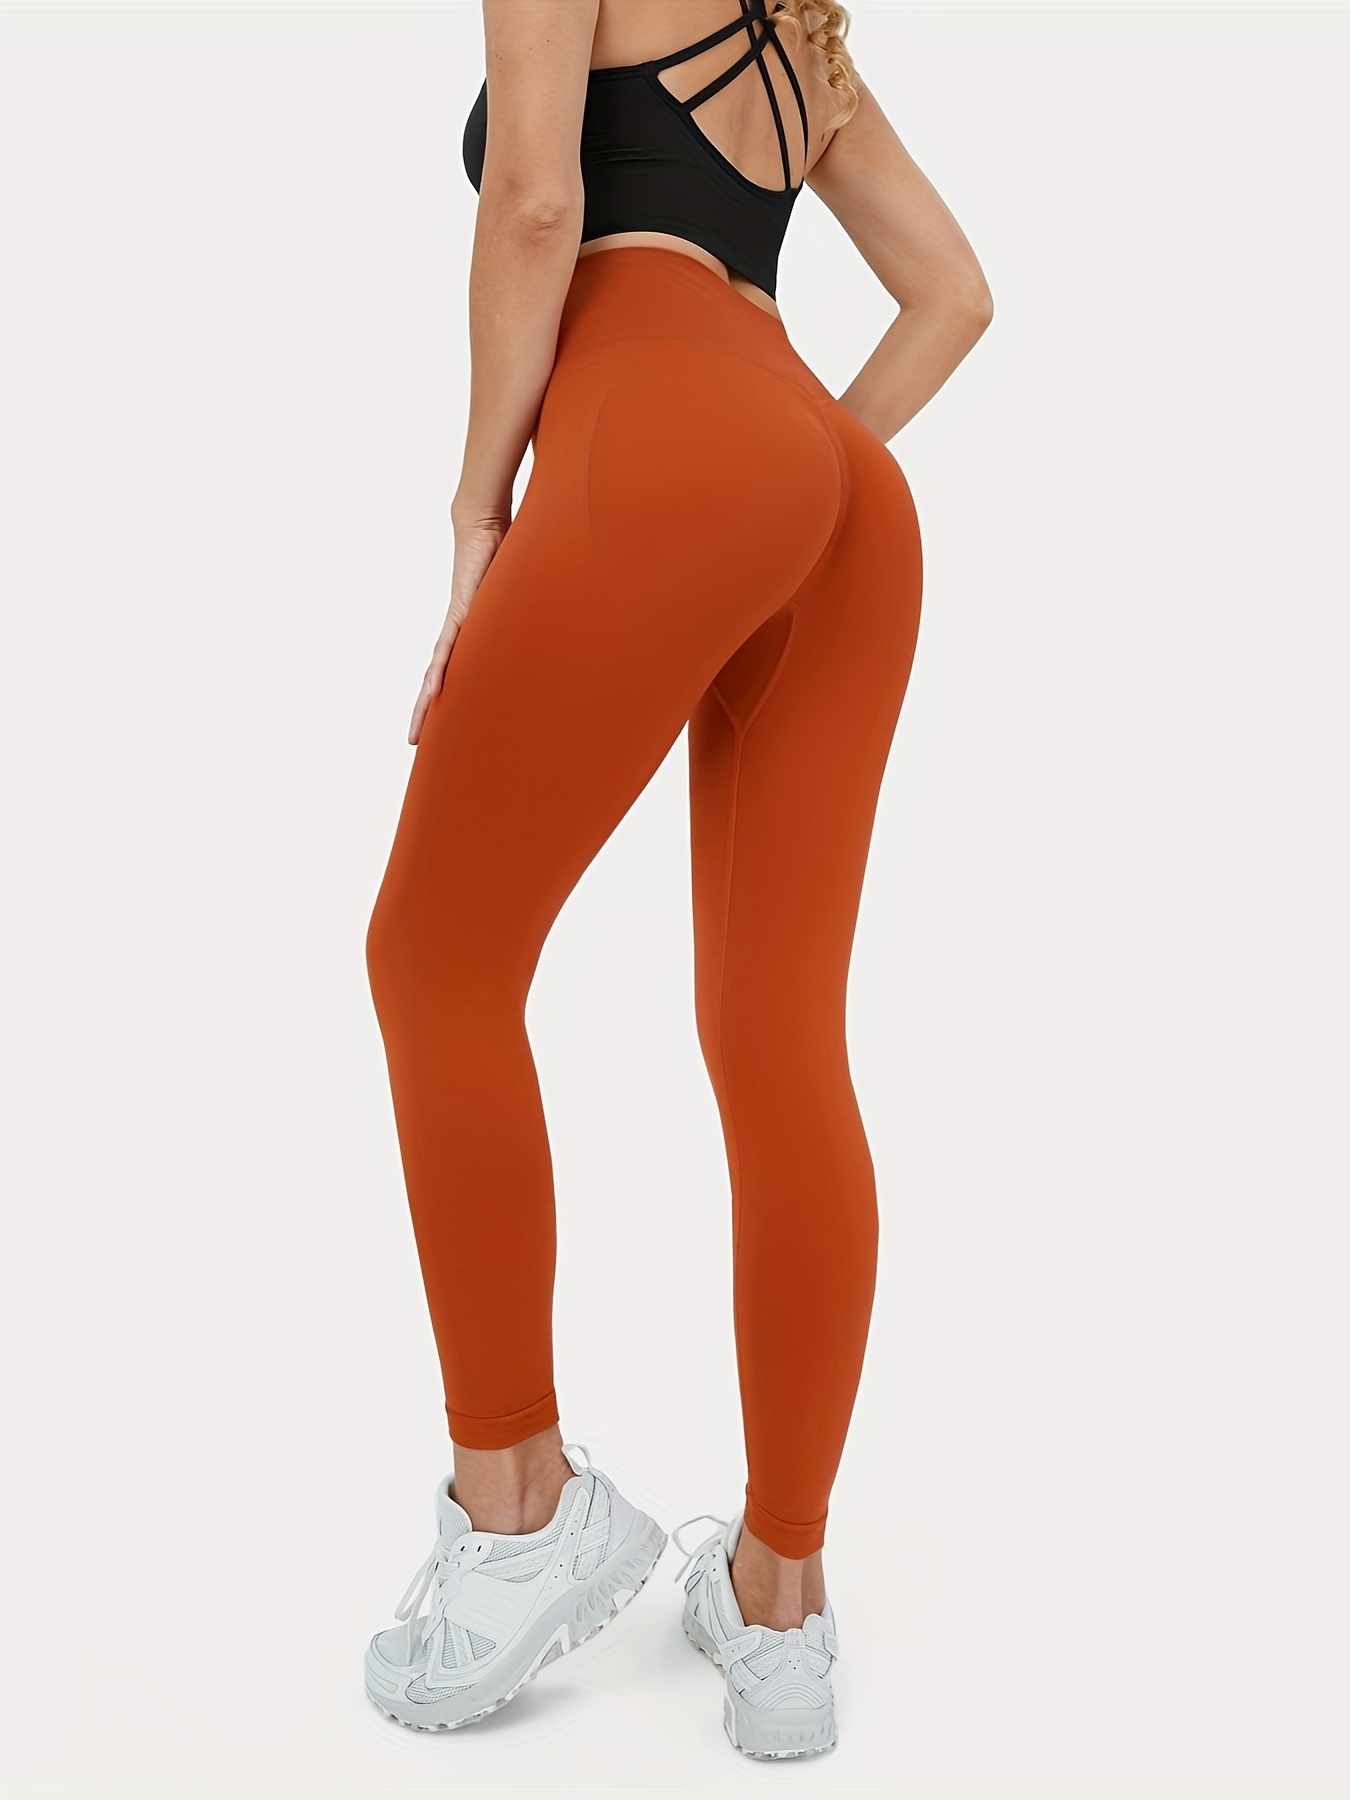 Solid Booty Scrunch Running Sports Pants, Seamless High Stretchy Hip  Lifting Yoga Fitness Leggings, Women's Activewear